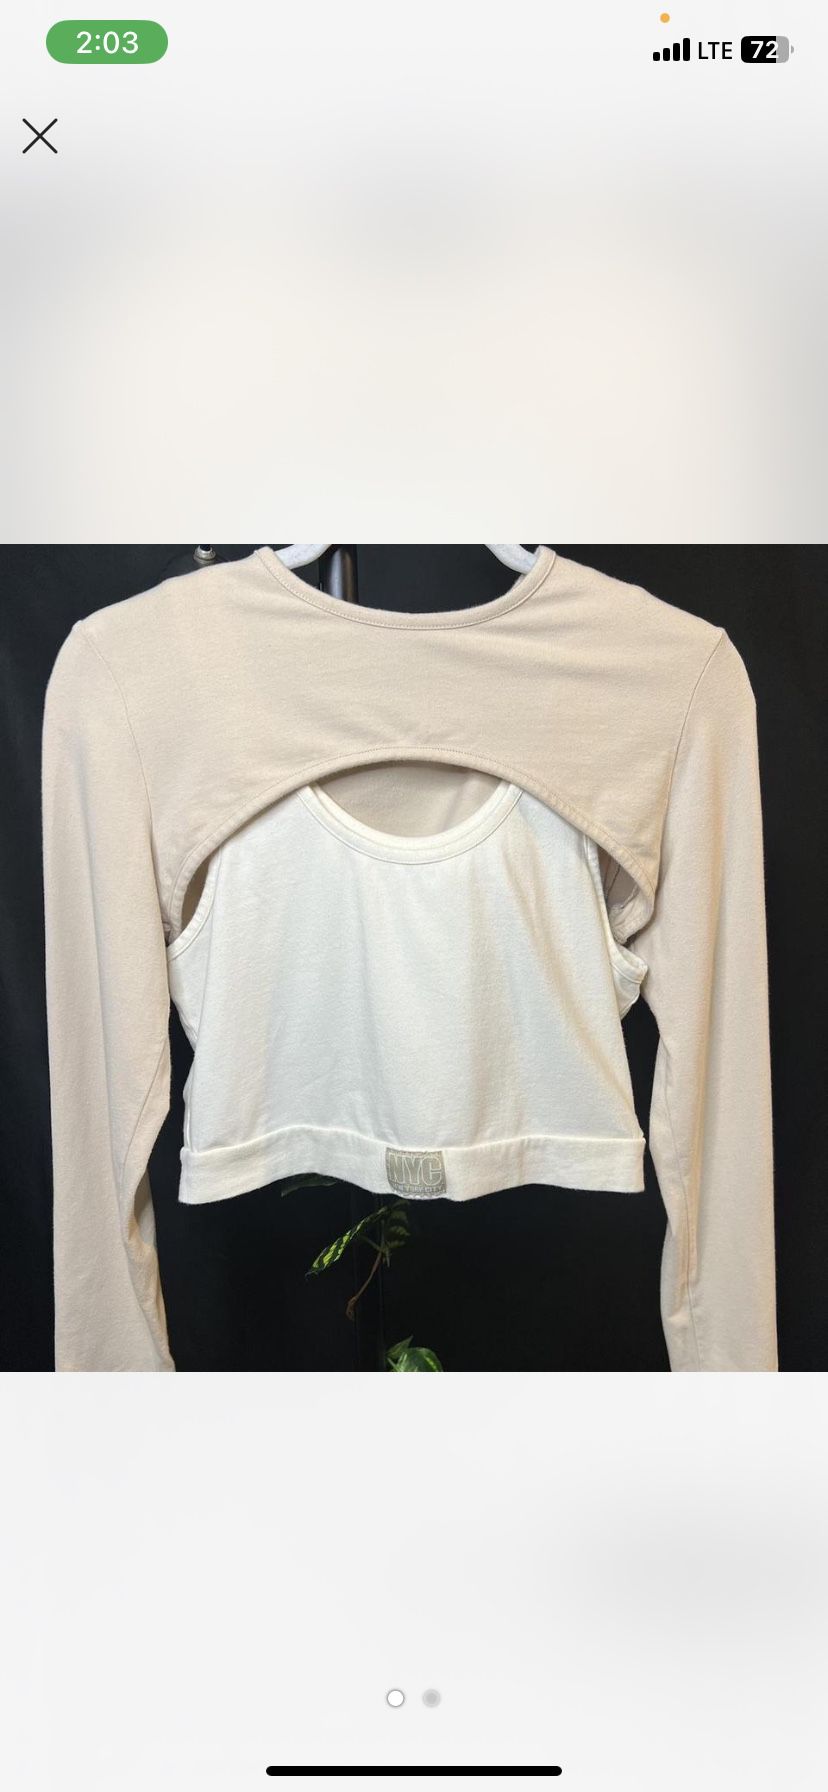 Layered Cut-Out Crop Top